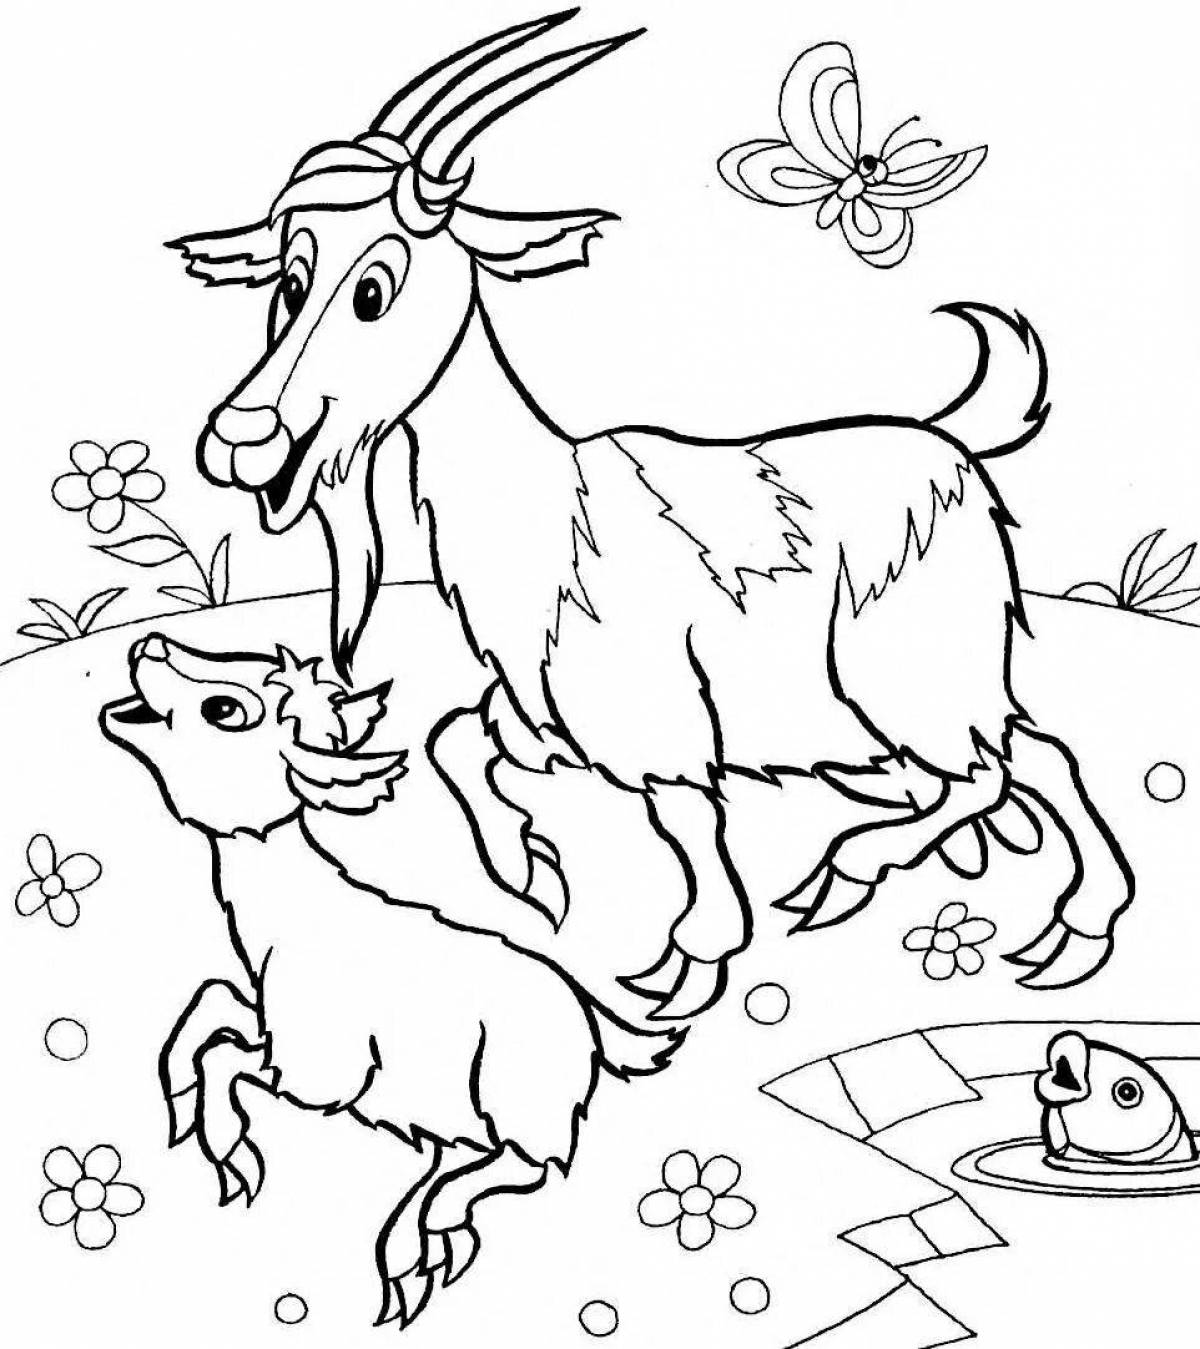 Amazing pet coloring pages for 5-7 year olds